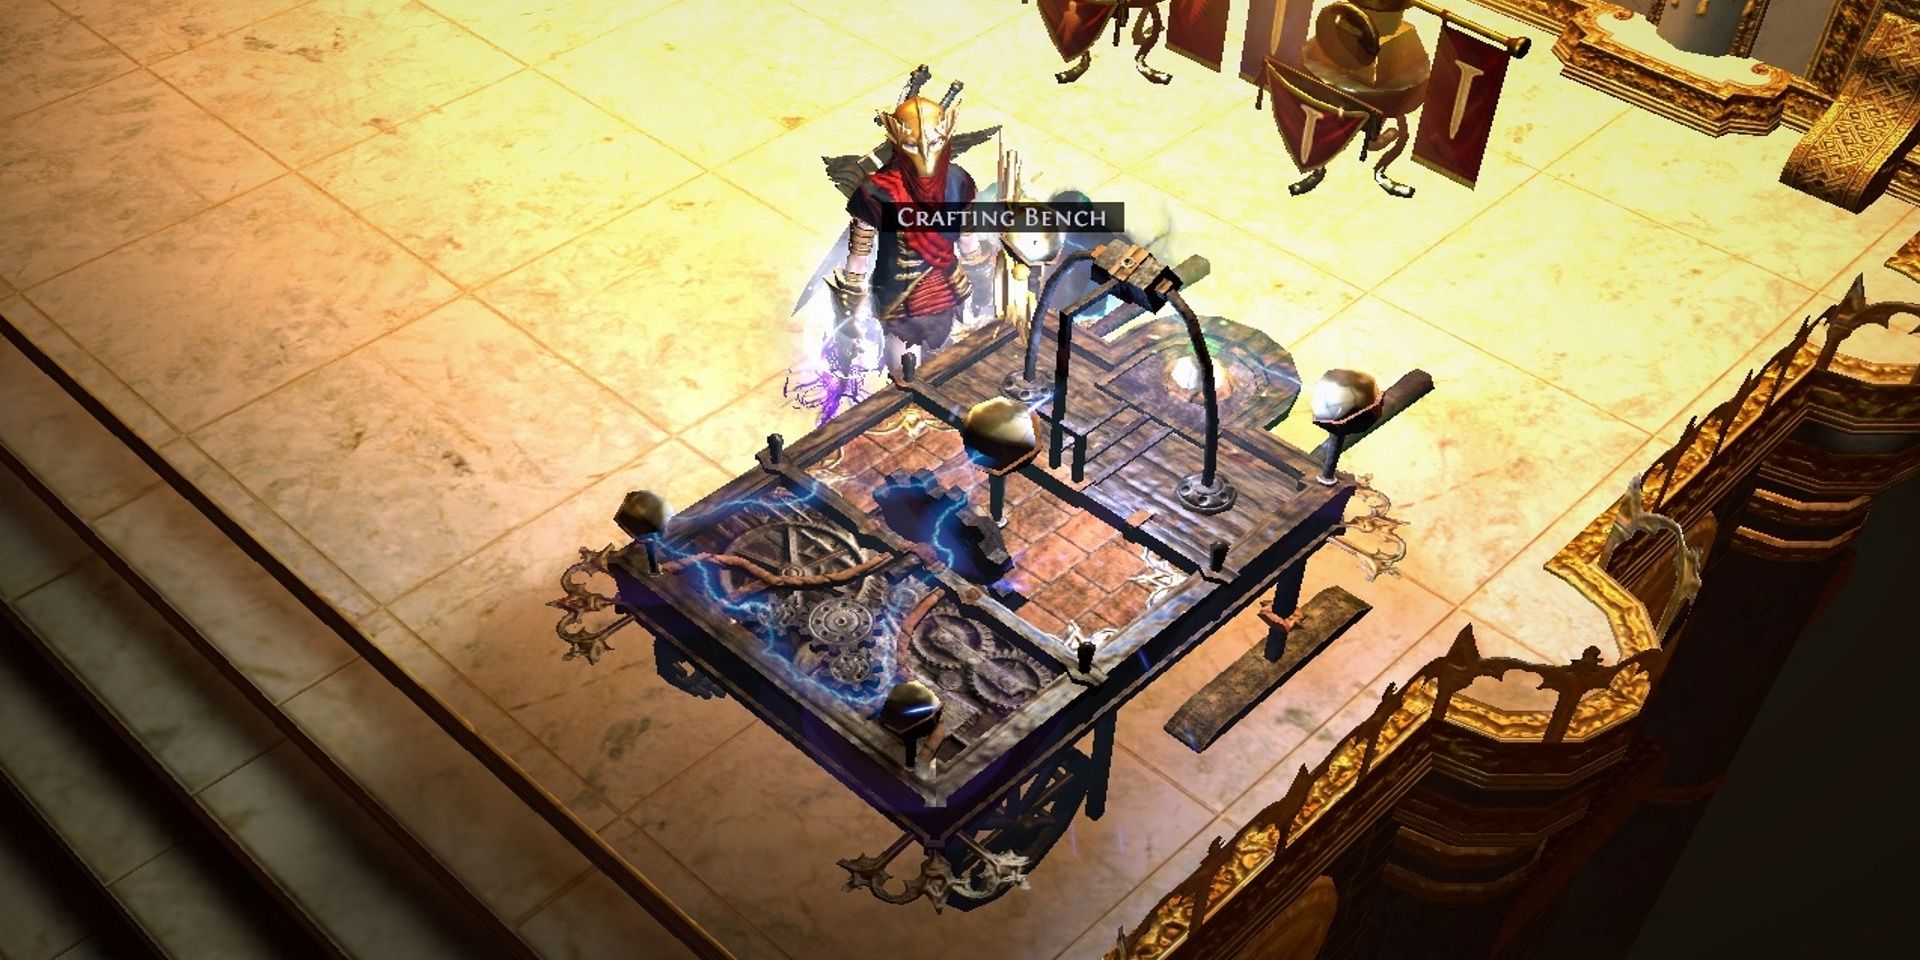 Path of Exile Crafting Bench item.